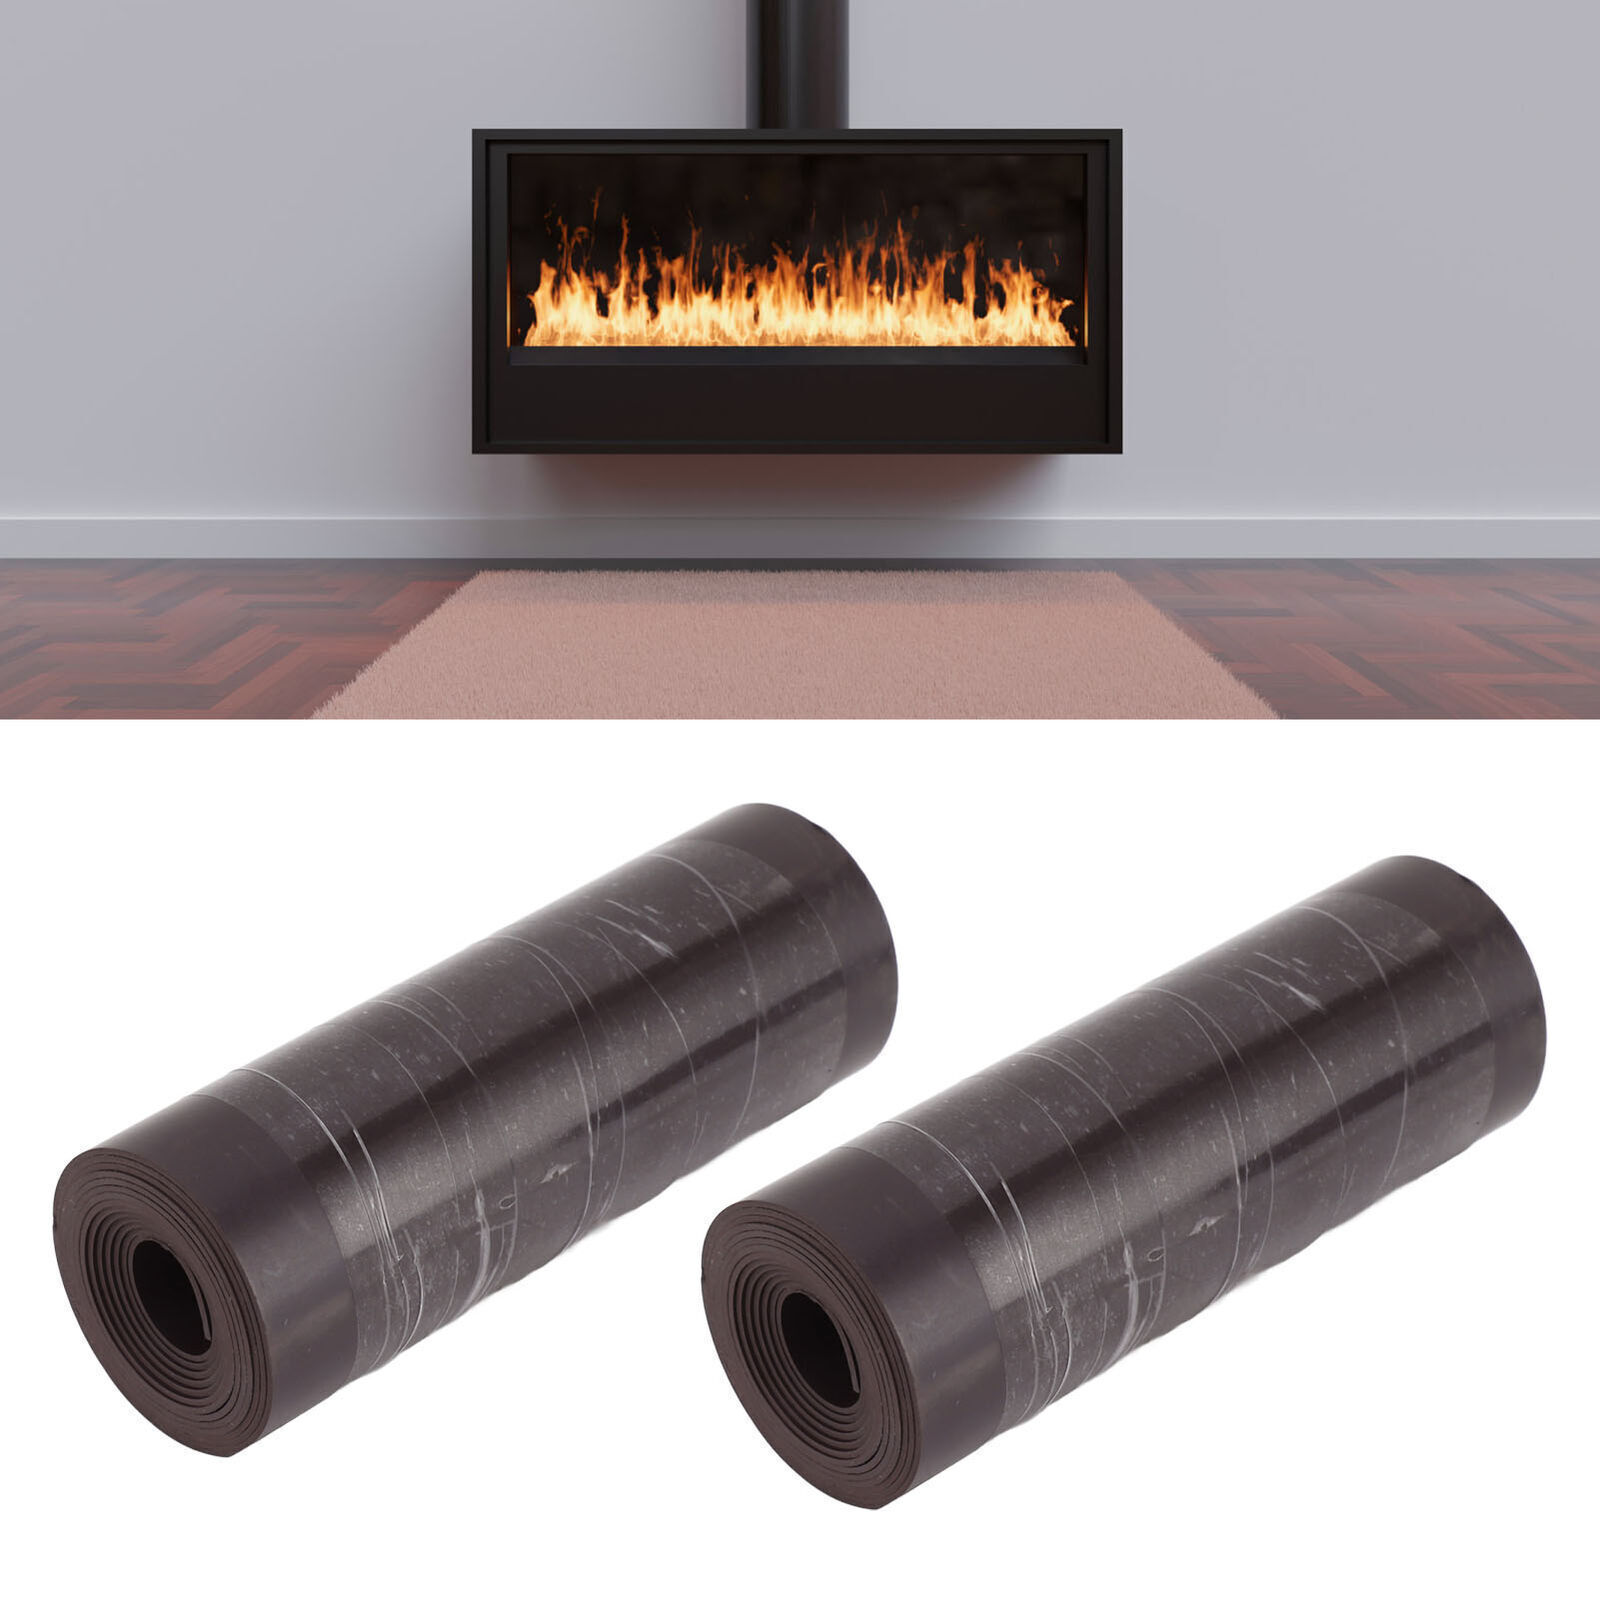 2Pcs Magnetic Fireplace Draft Stopper Windproof Prevent Heat Loss Improve